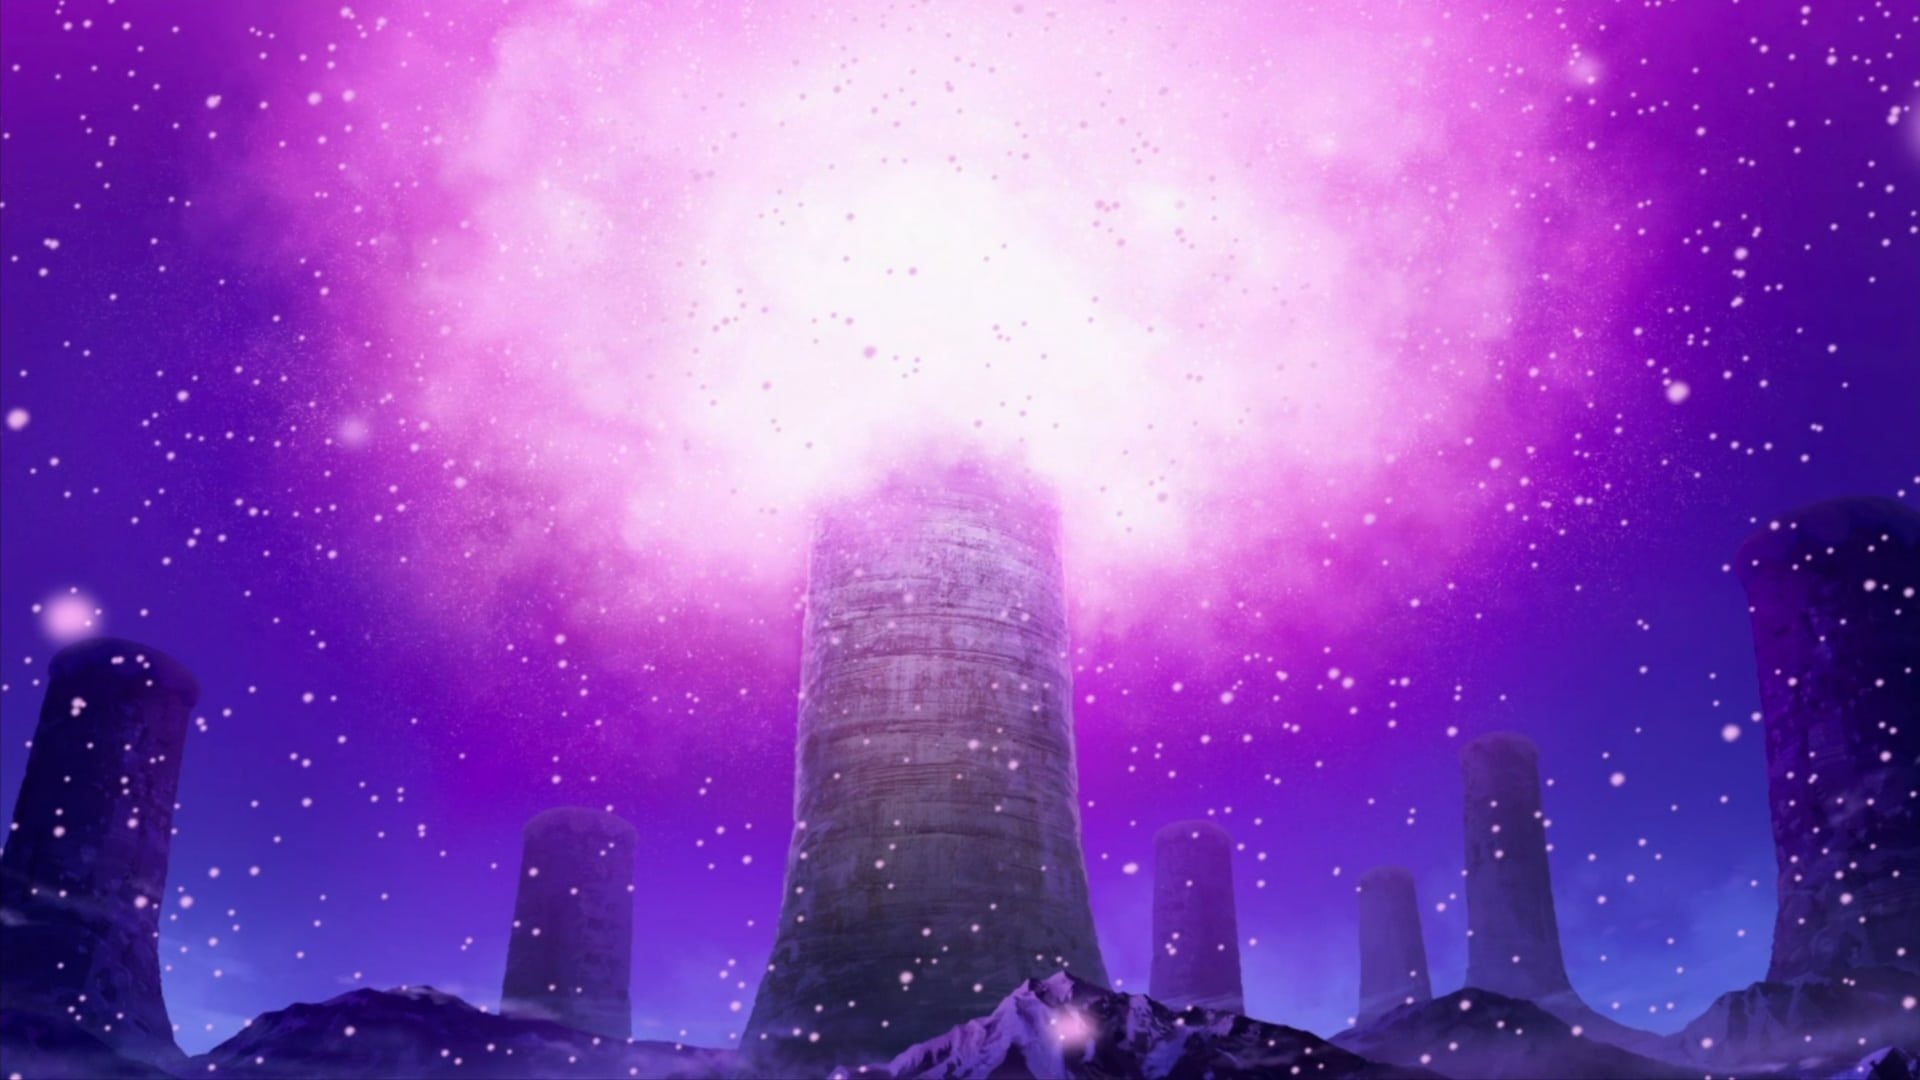 One Piece: Episode of Chopper Plus - Bloom in the Winter, Miracle Sakura Backdrop